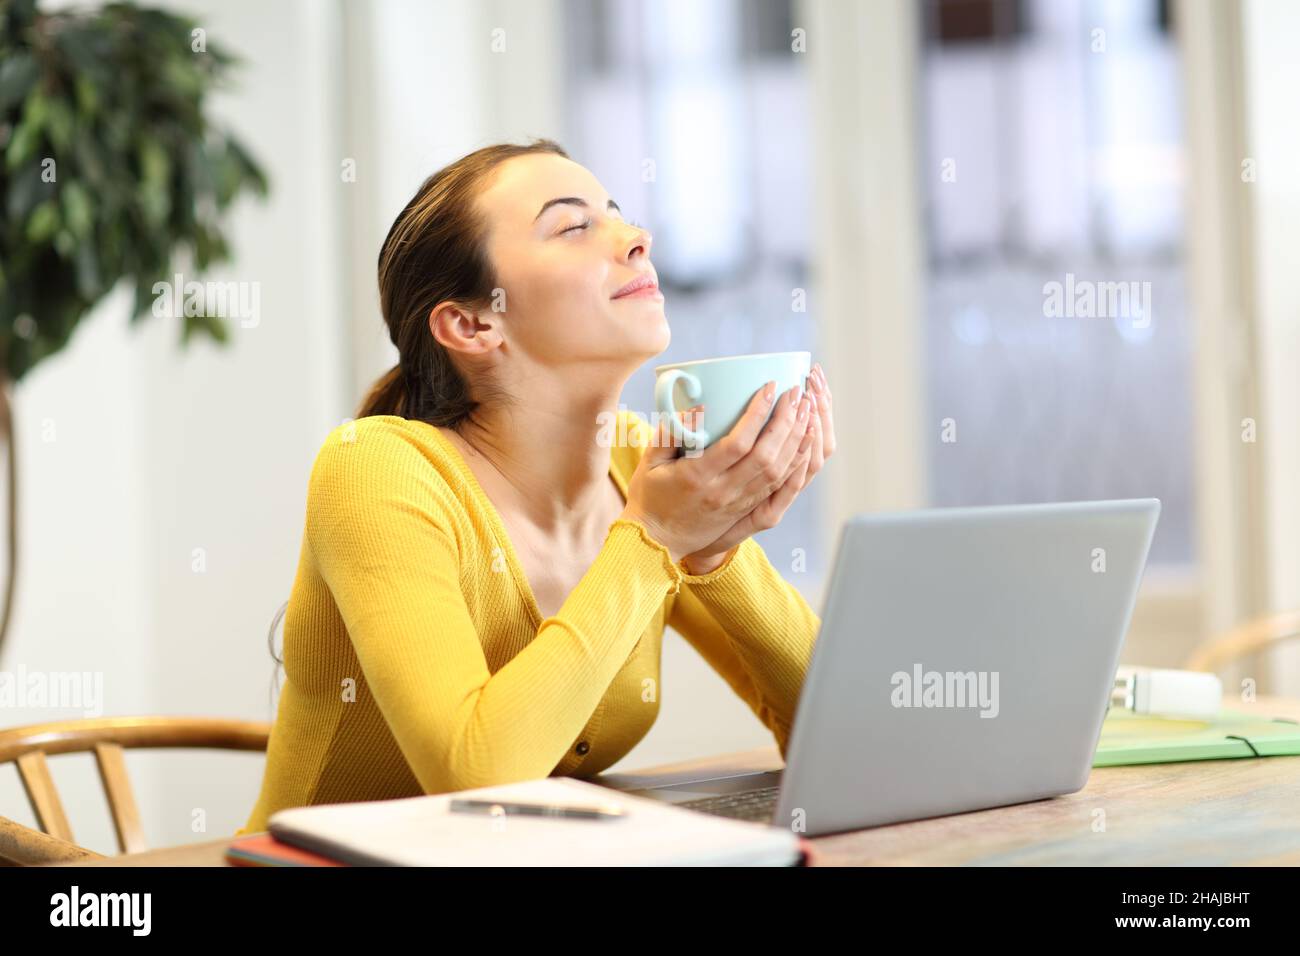 Student resting drinking coffee sitting on a chair at home Stock Photo